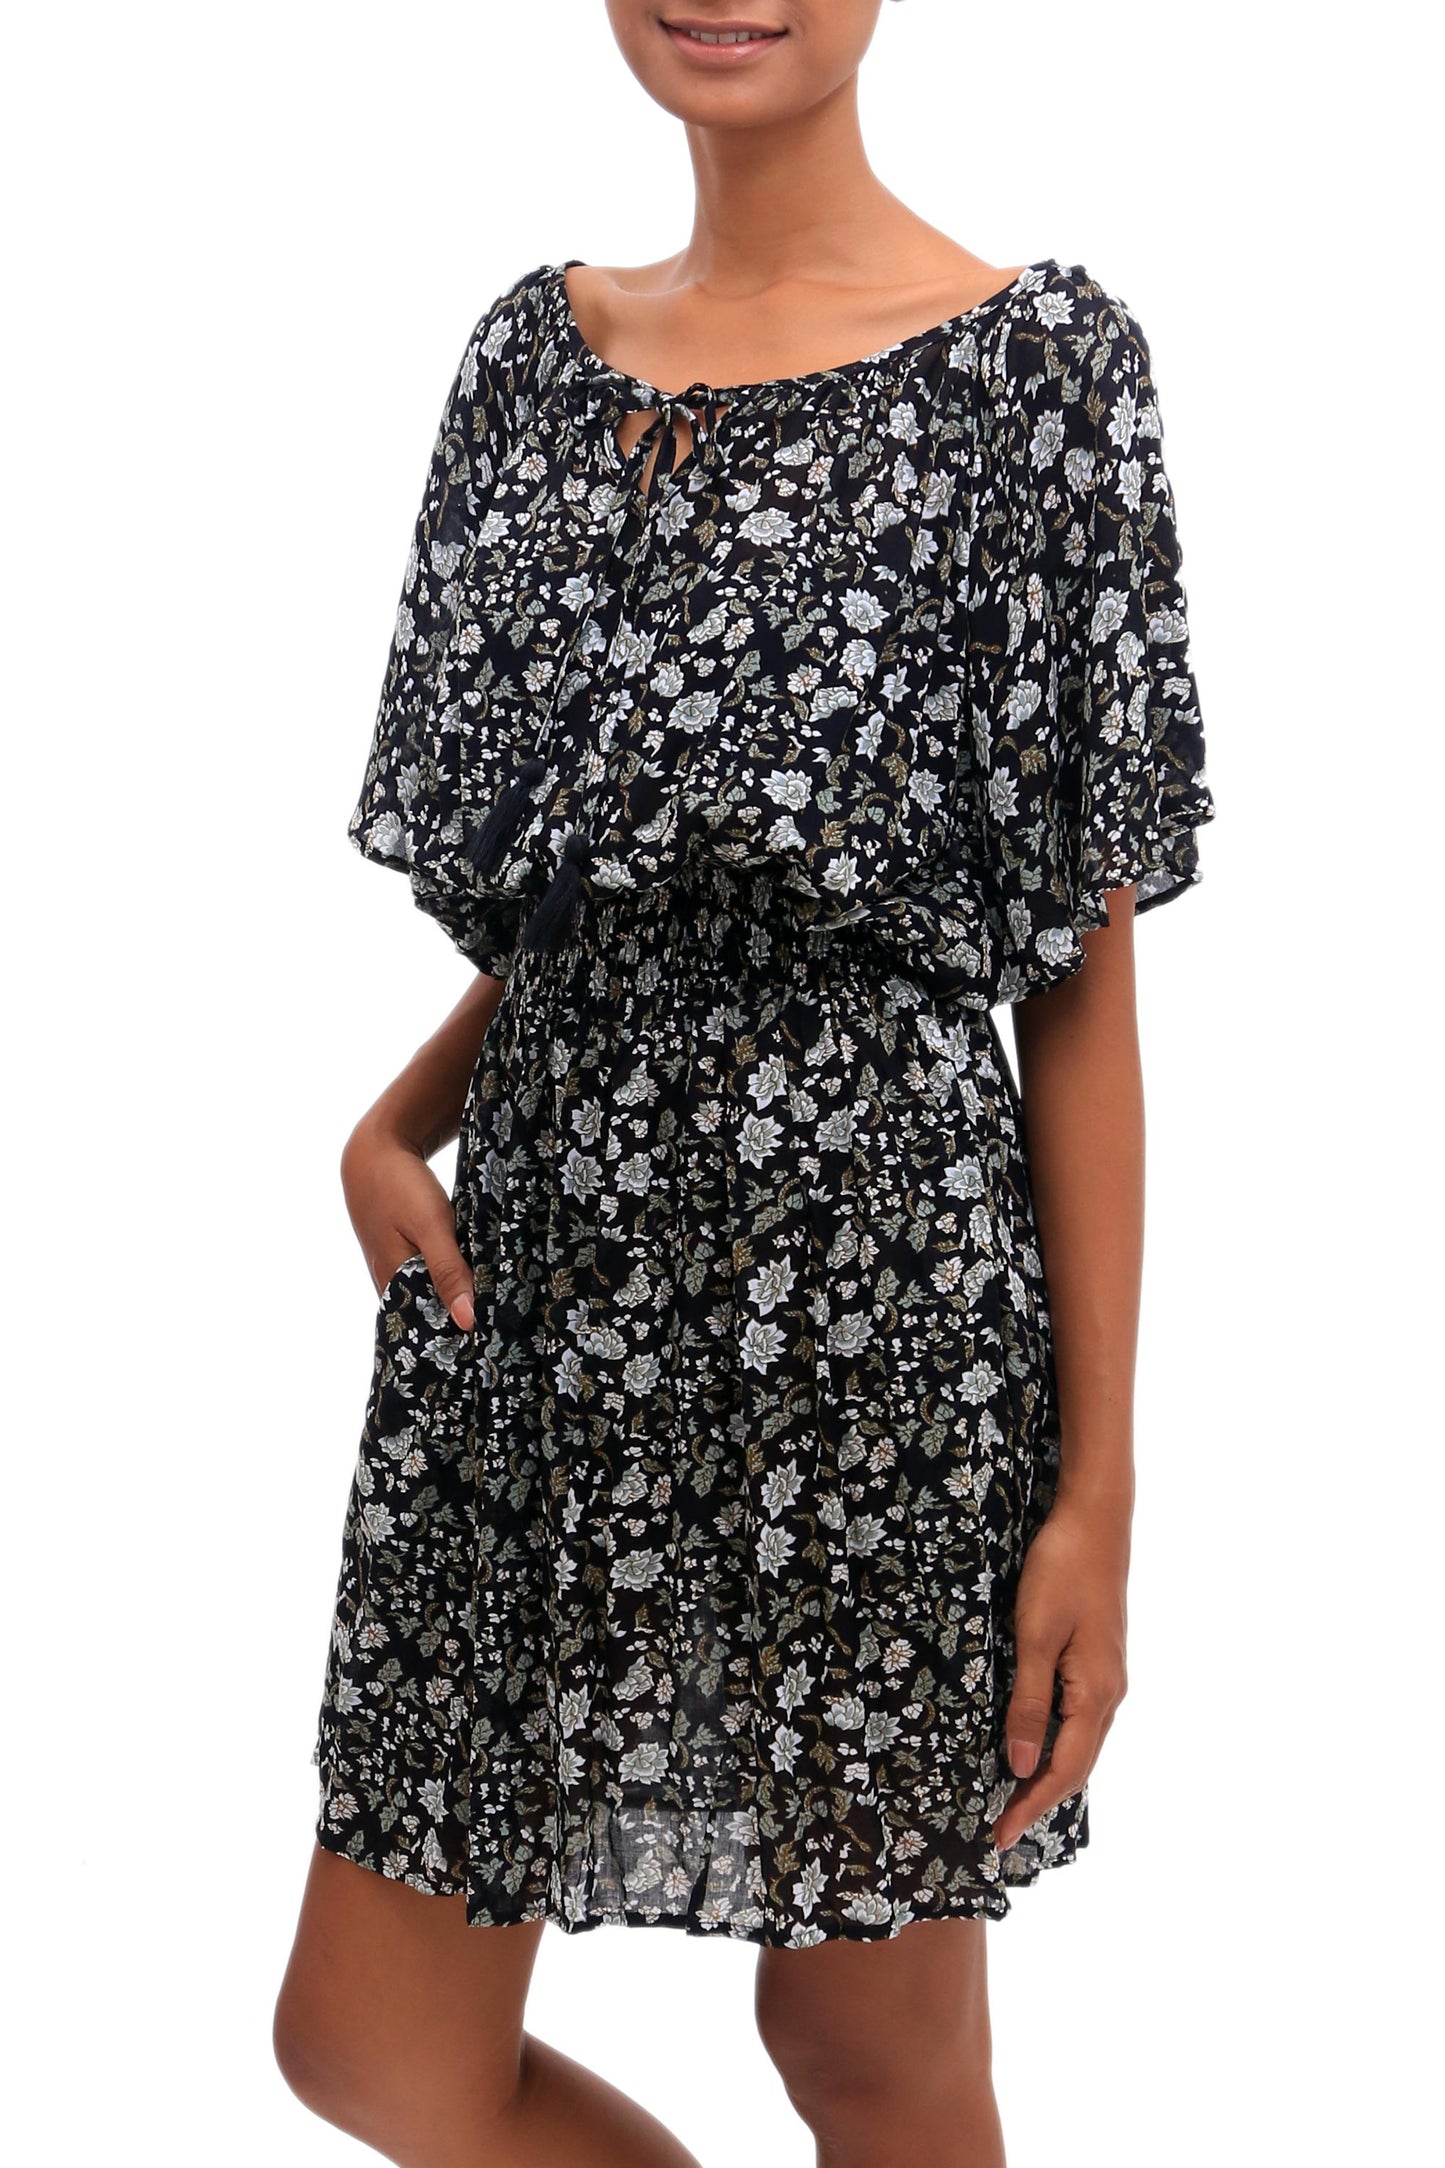 Venus Flowers Floral Printed Rayon Tunic-Style Dress from Bali